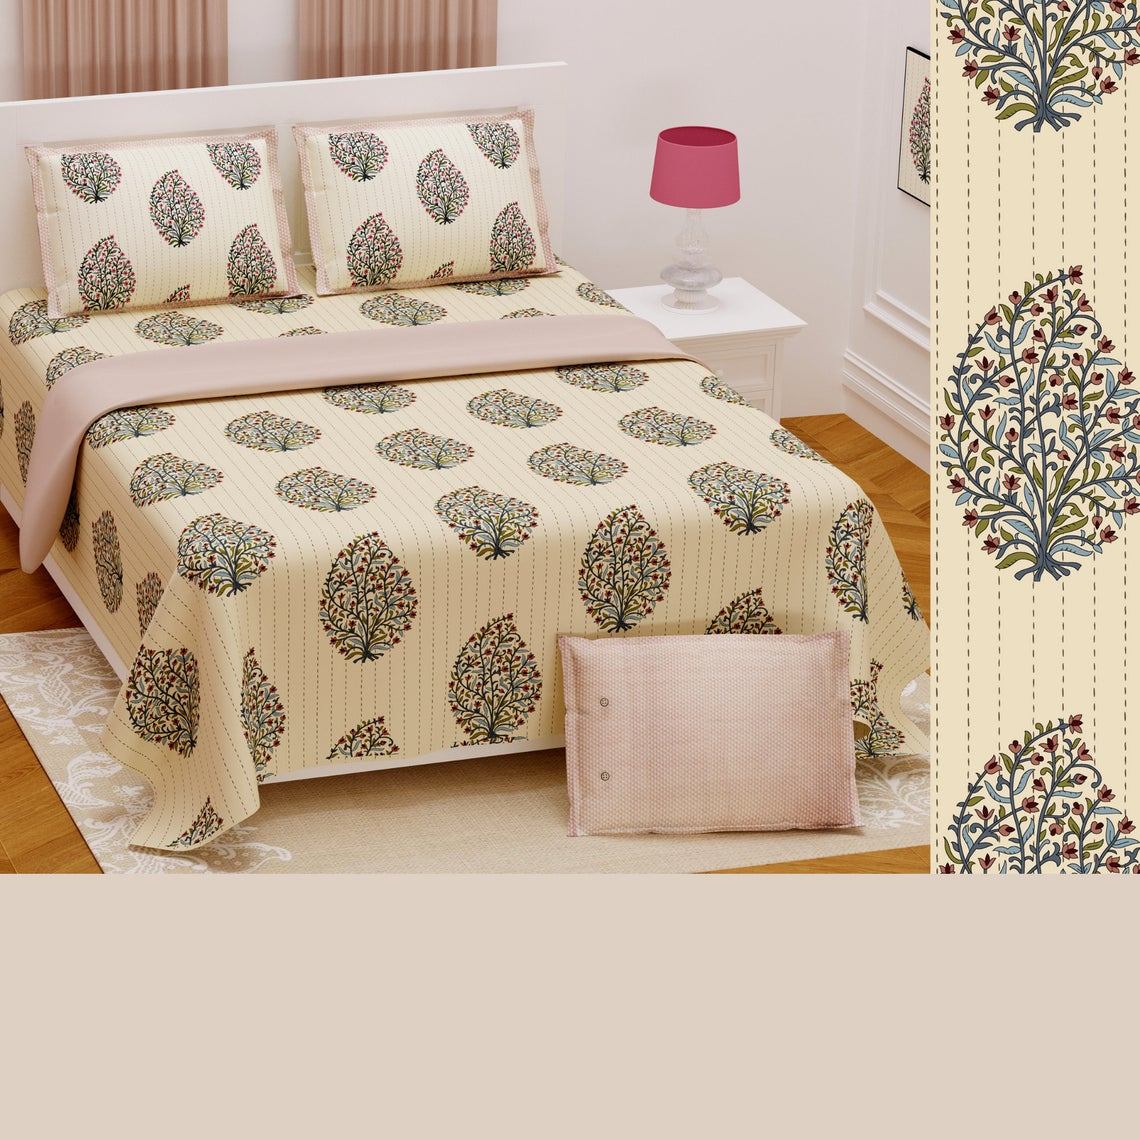 Buy Small Rose Tree King Size Bedding Luxury With Pillow Covers